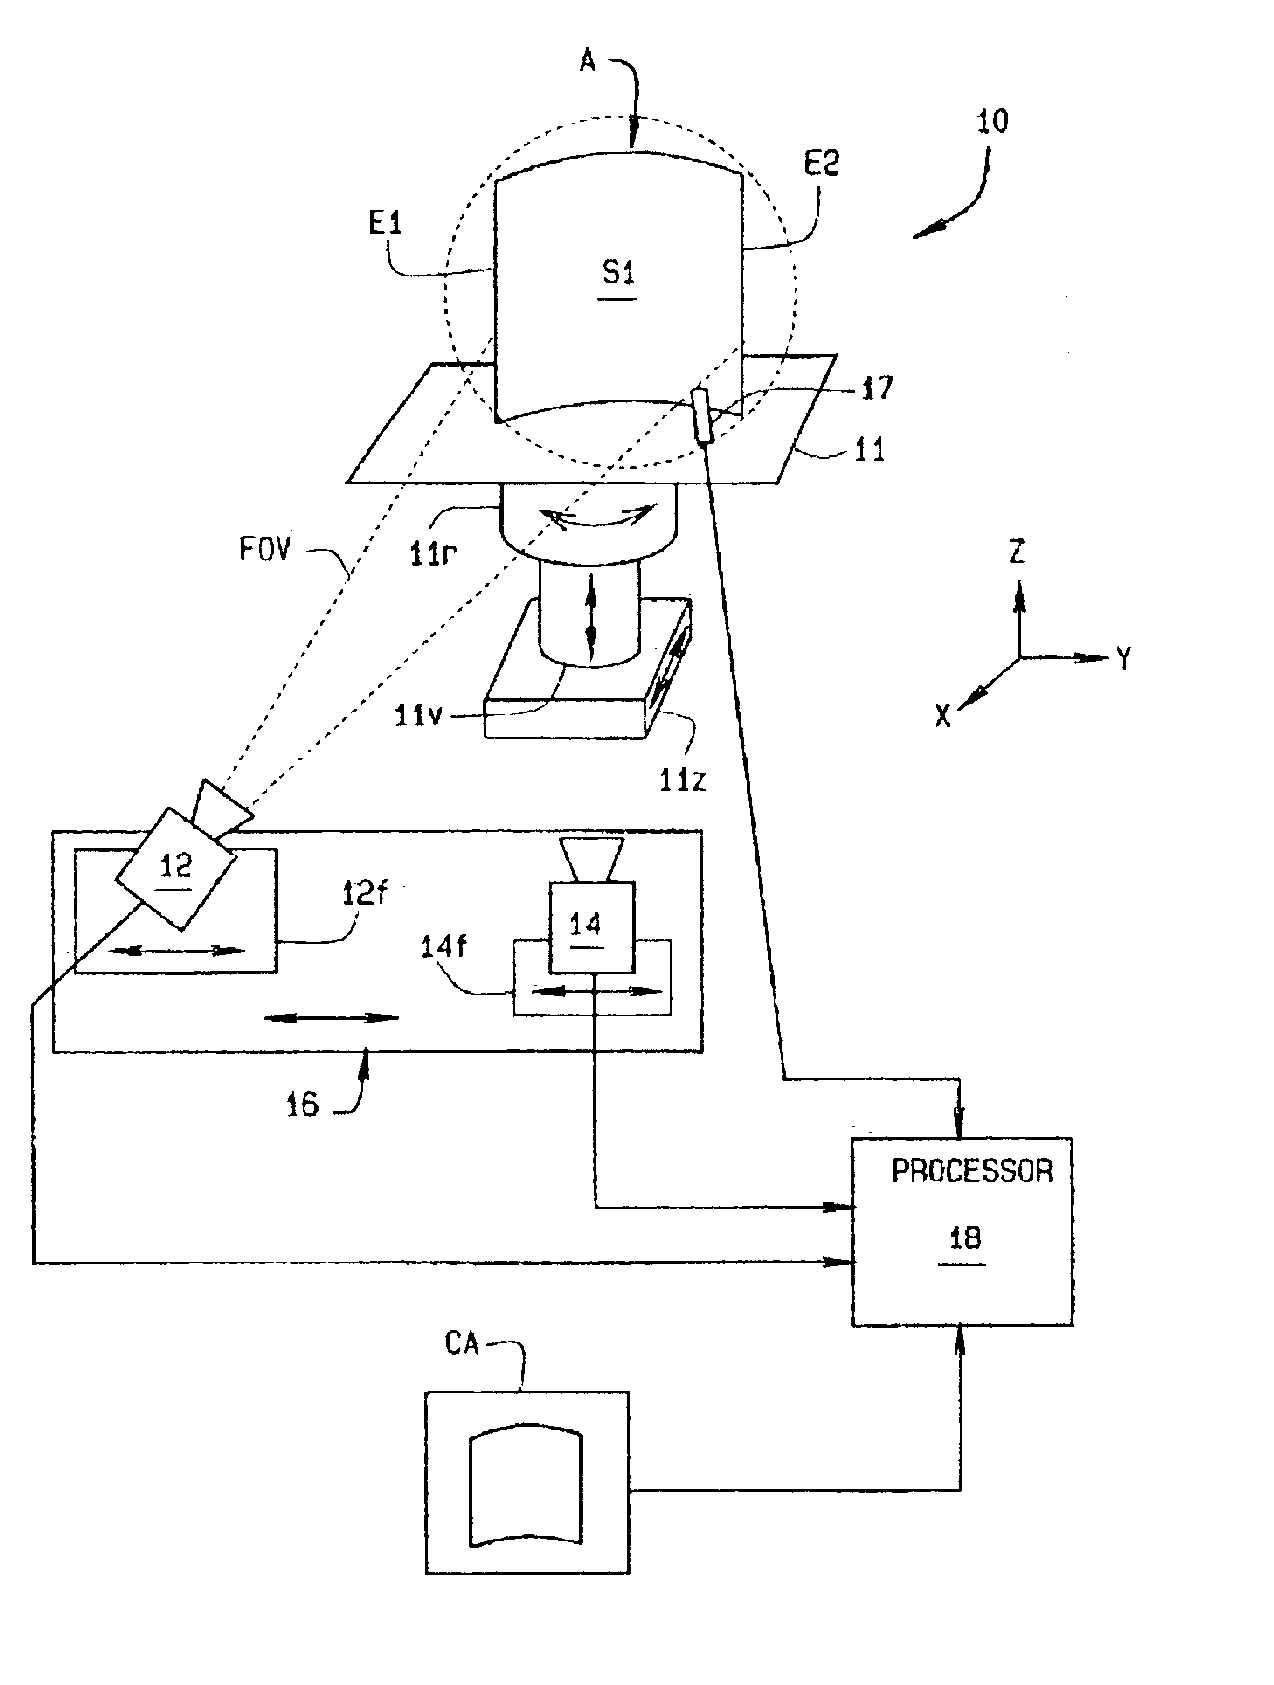 Non-contact measurement system for large airfoils